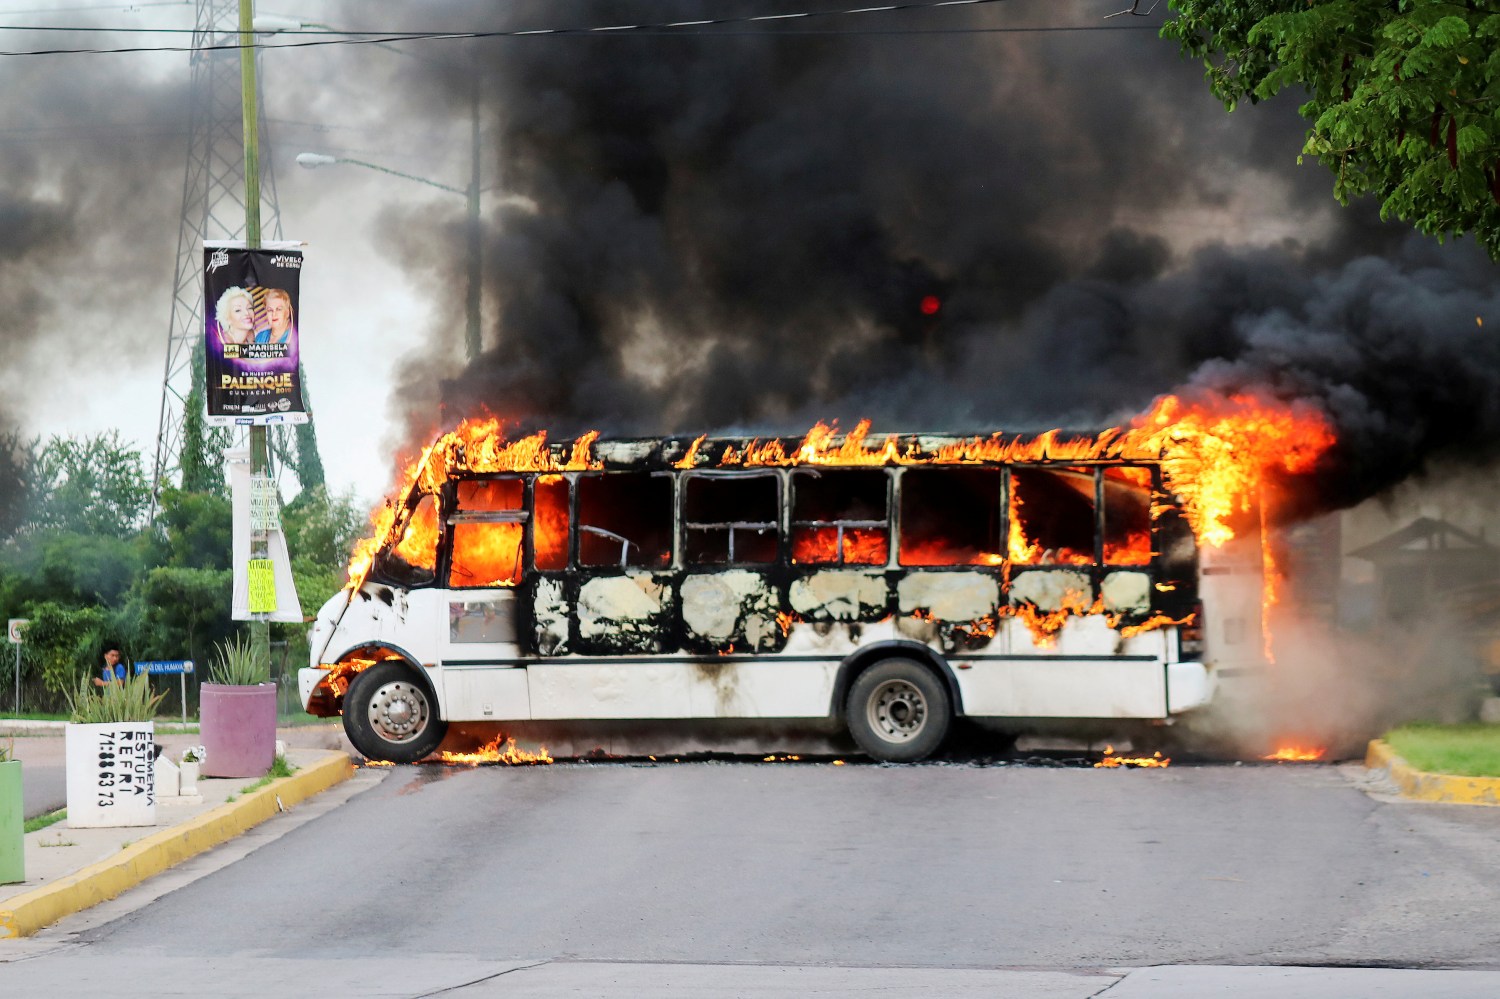 A burning bus, set alight by cartel gunmen to block a road, is pictured during clashes with federal forces following the detention of Ovidio Guzman, son of drug kingpin Joaquin "El Chapo" Guzman, in Culiacan, Sinaloa state, Mexico October 17, 2019. REUTERS/Stringer